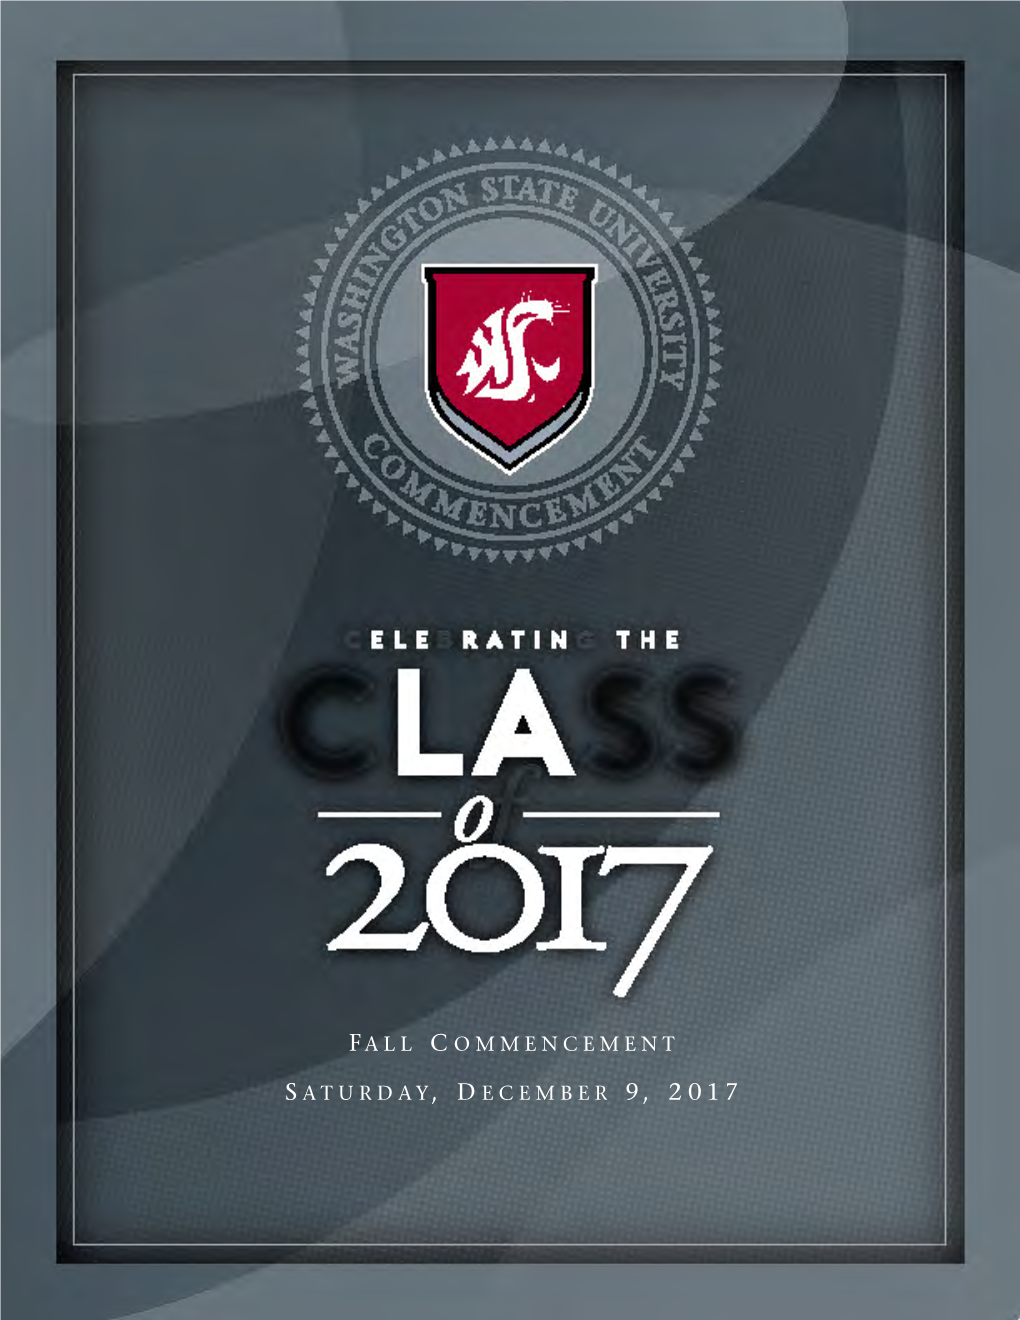 Fall 2017 Commencement Program Include August 2017 Degree Candidates and December 2017 Degree Candidates Who Met the Application Deadline